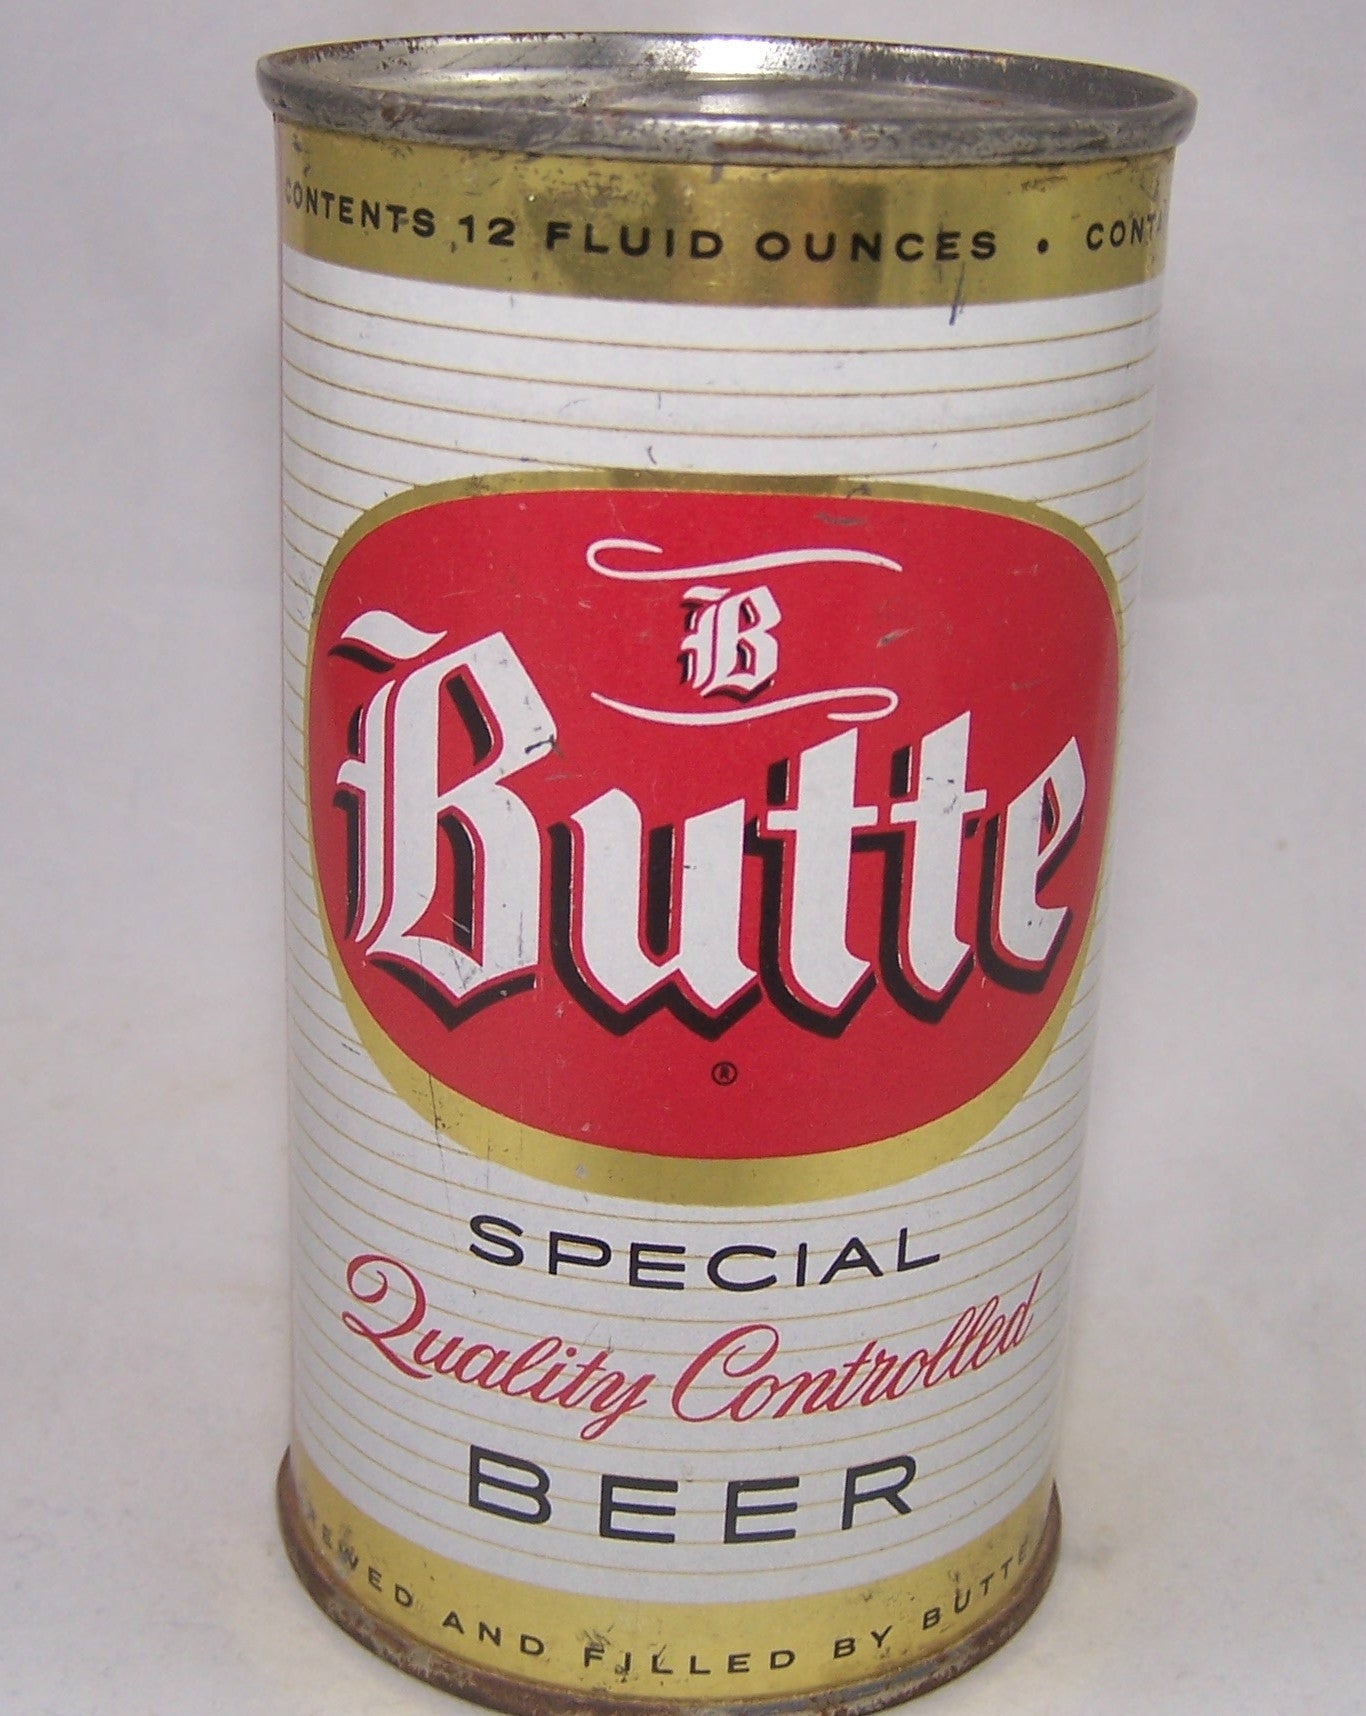 Butte Special Beer, USBC 47-33, CNMT 4%, Grade 1 Sold on 08/26/17